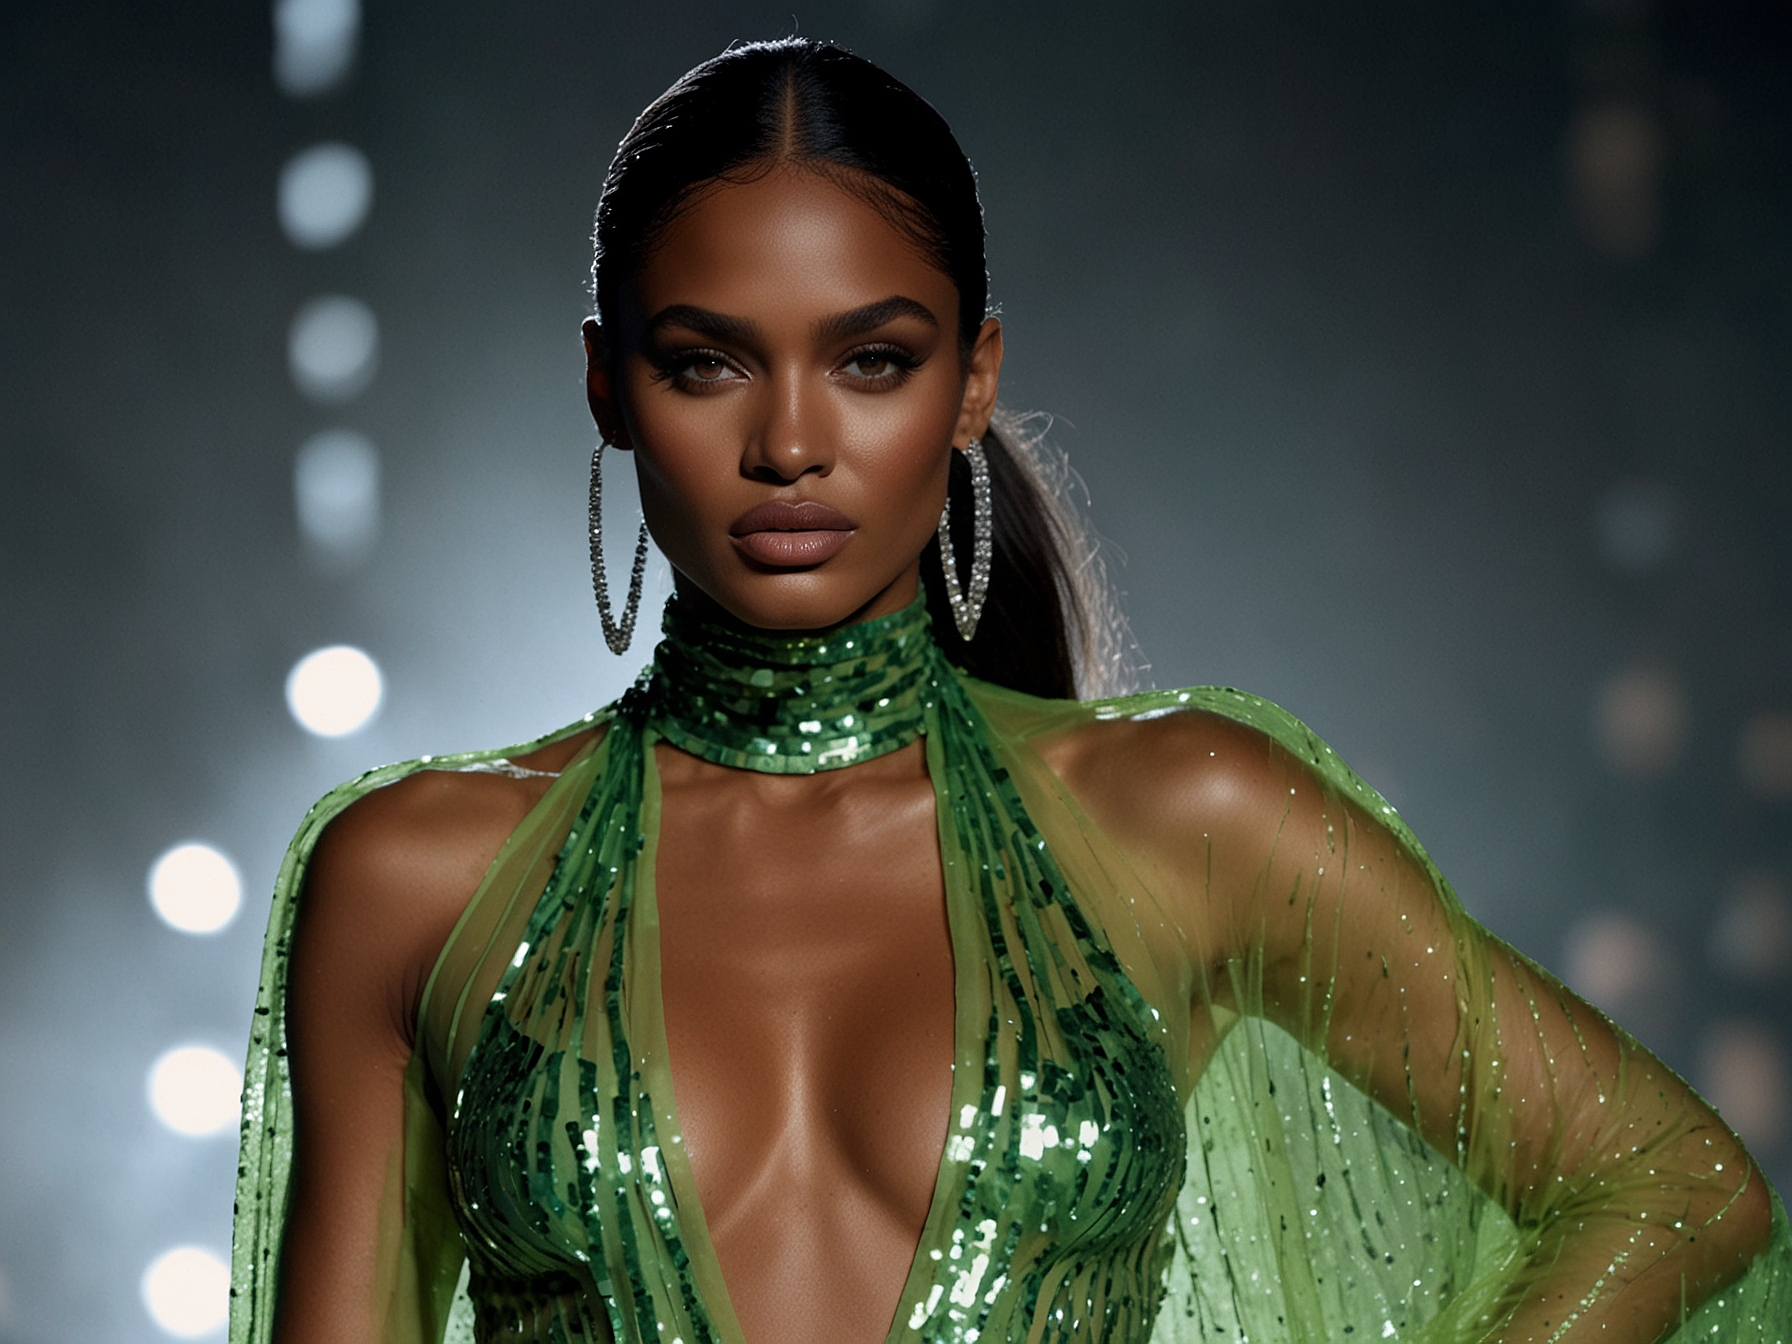 Ciara graces the runway at the Vogue World Paris show, wearing a neon green mesh cloak over a dazzling sequin bodysuit, stealing the spotlight and setting new fashion benchmarks.